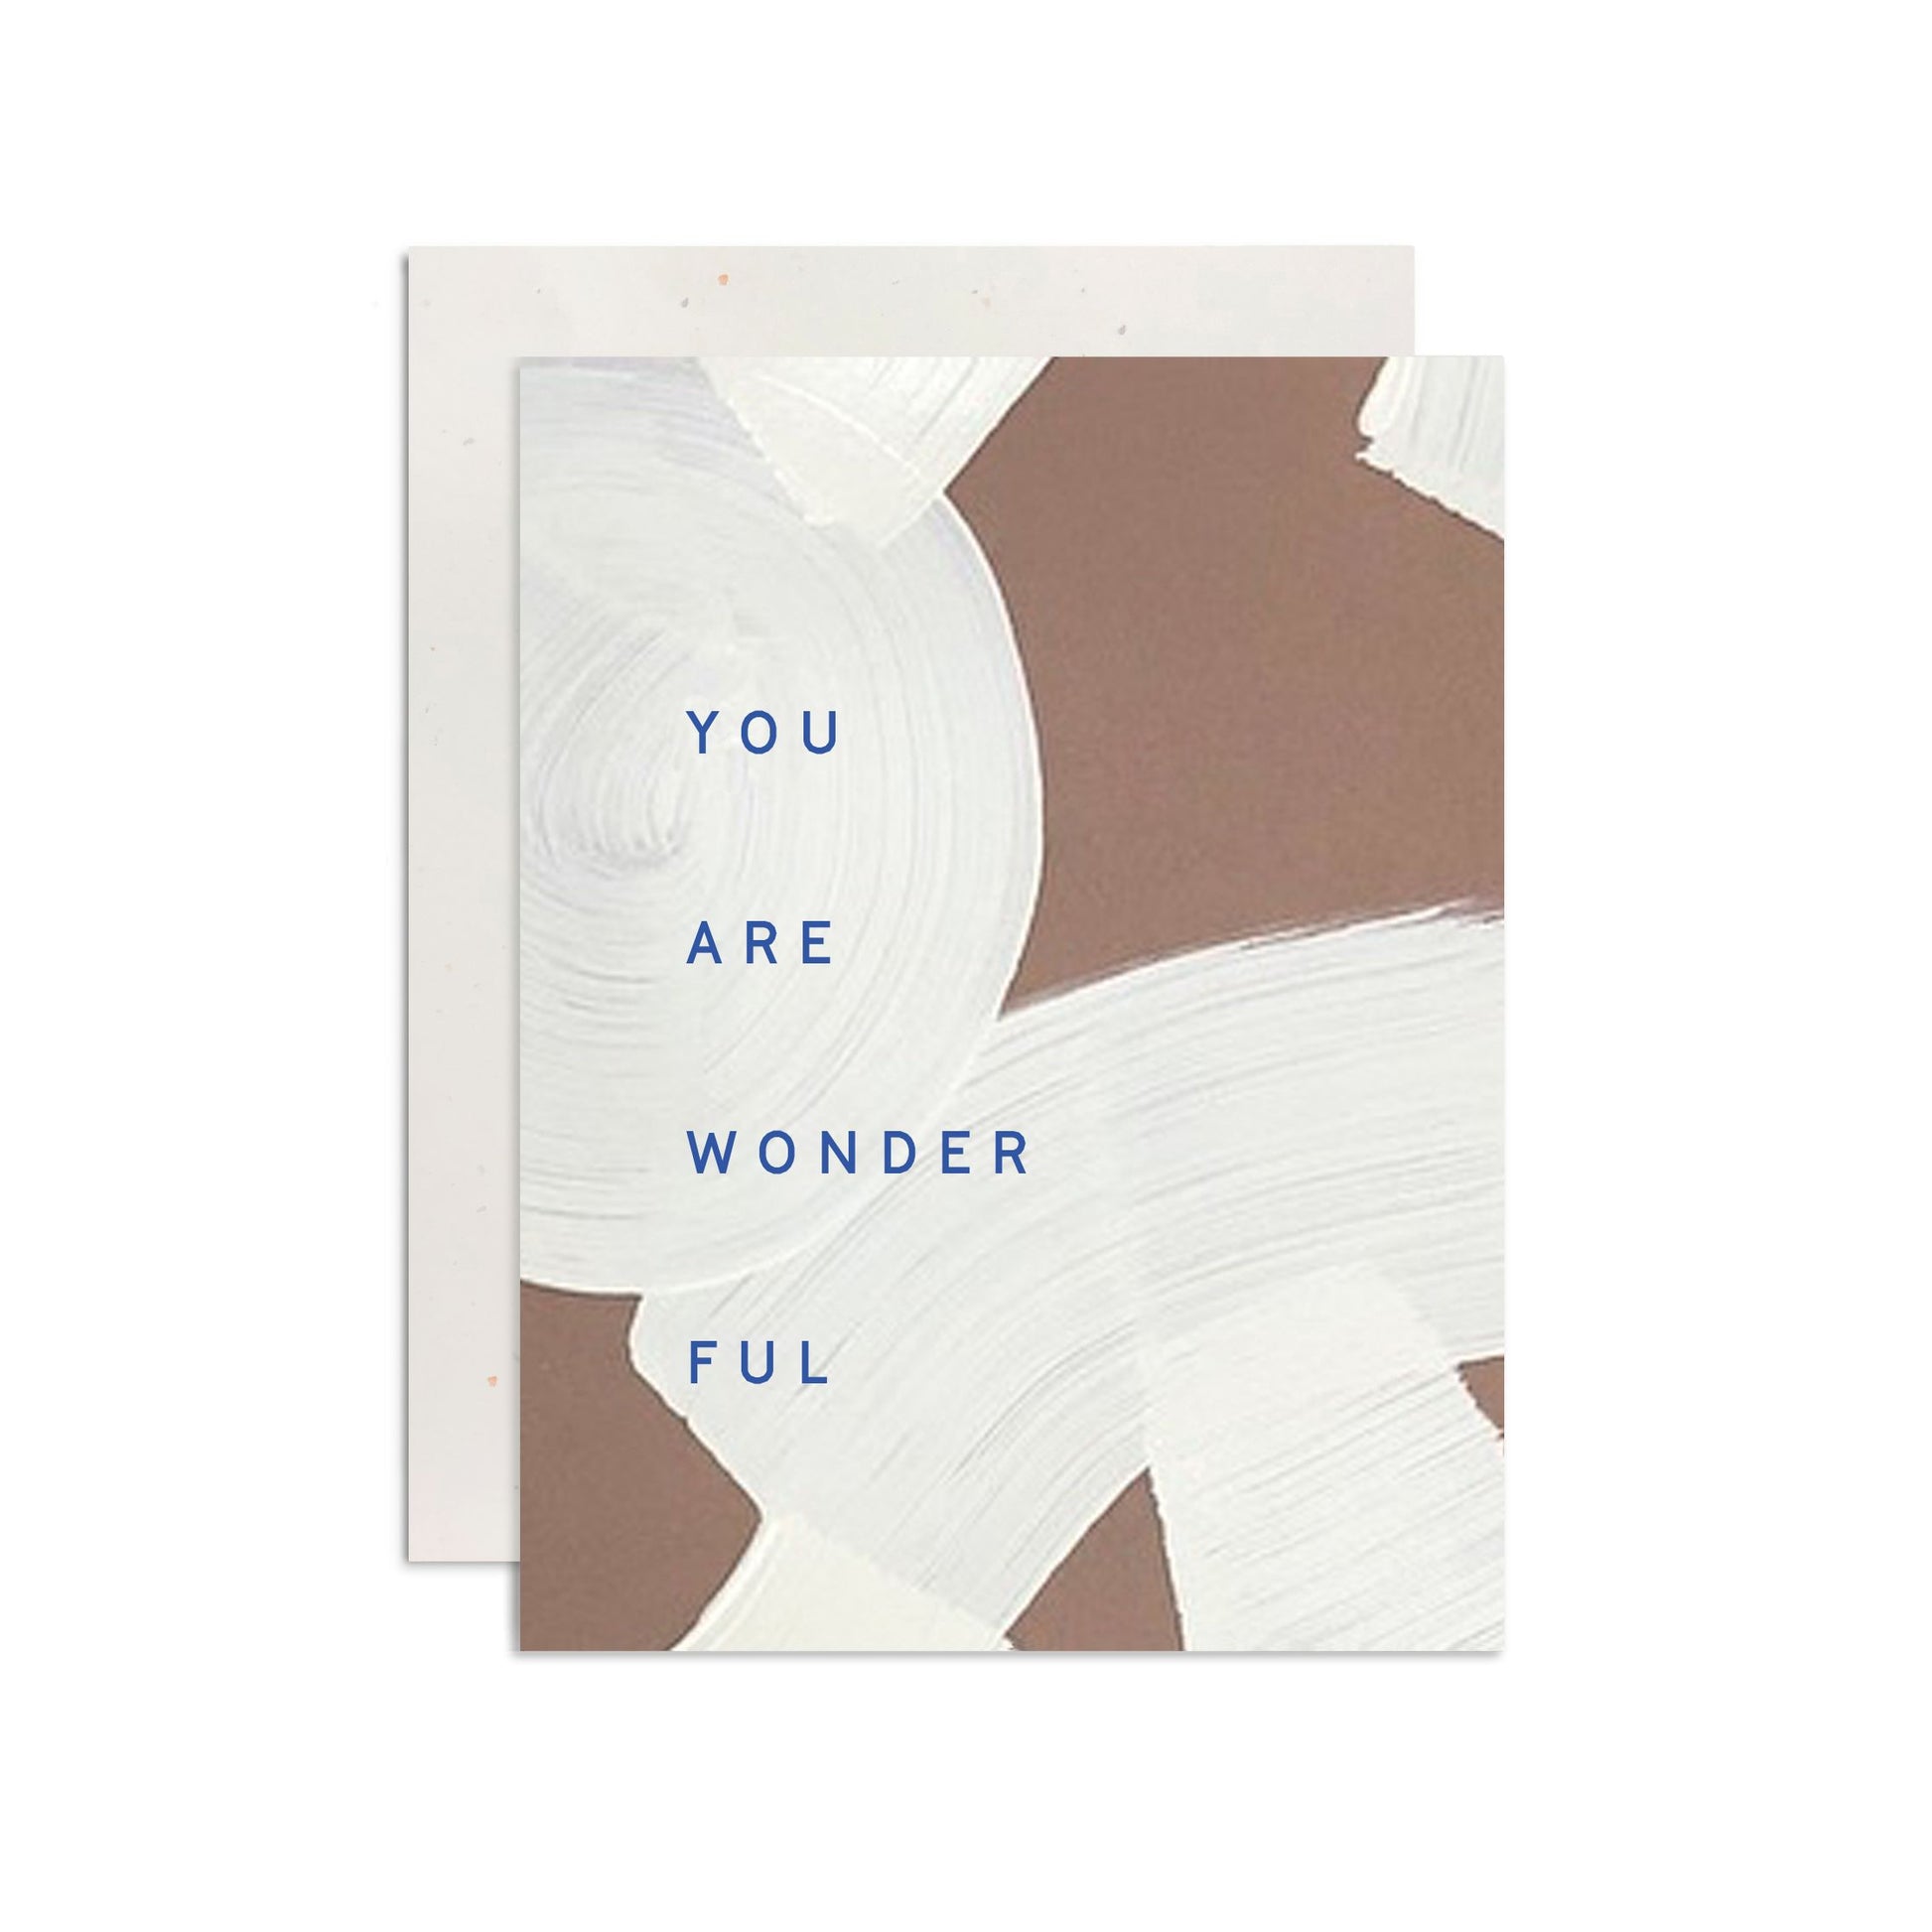 Hand painted letterpress card in Brown and White by Moglea. Reads "You Are Wonderful".